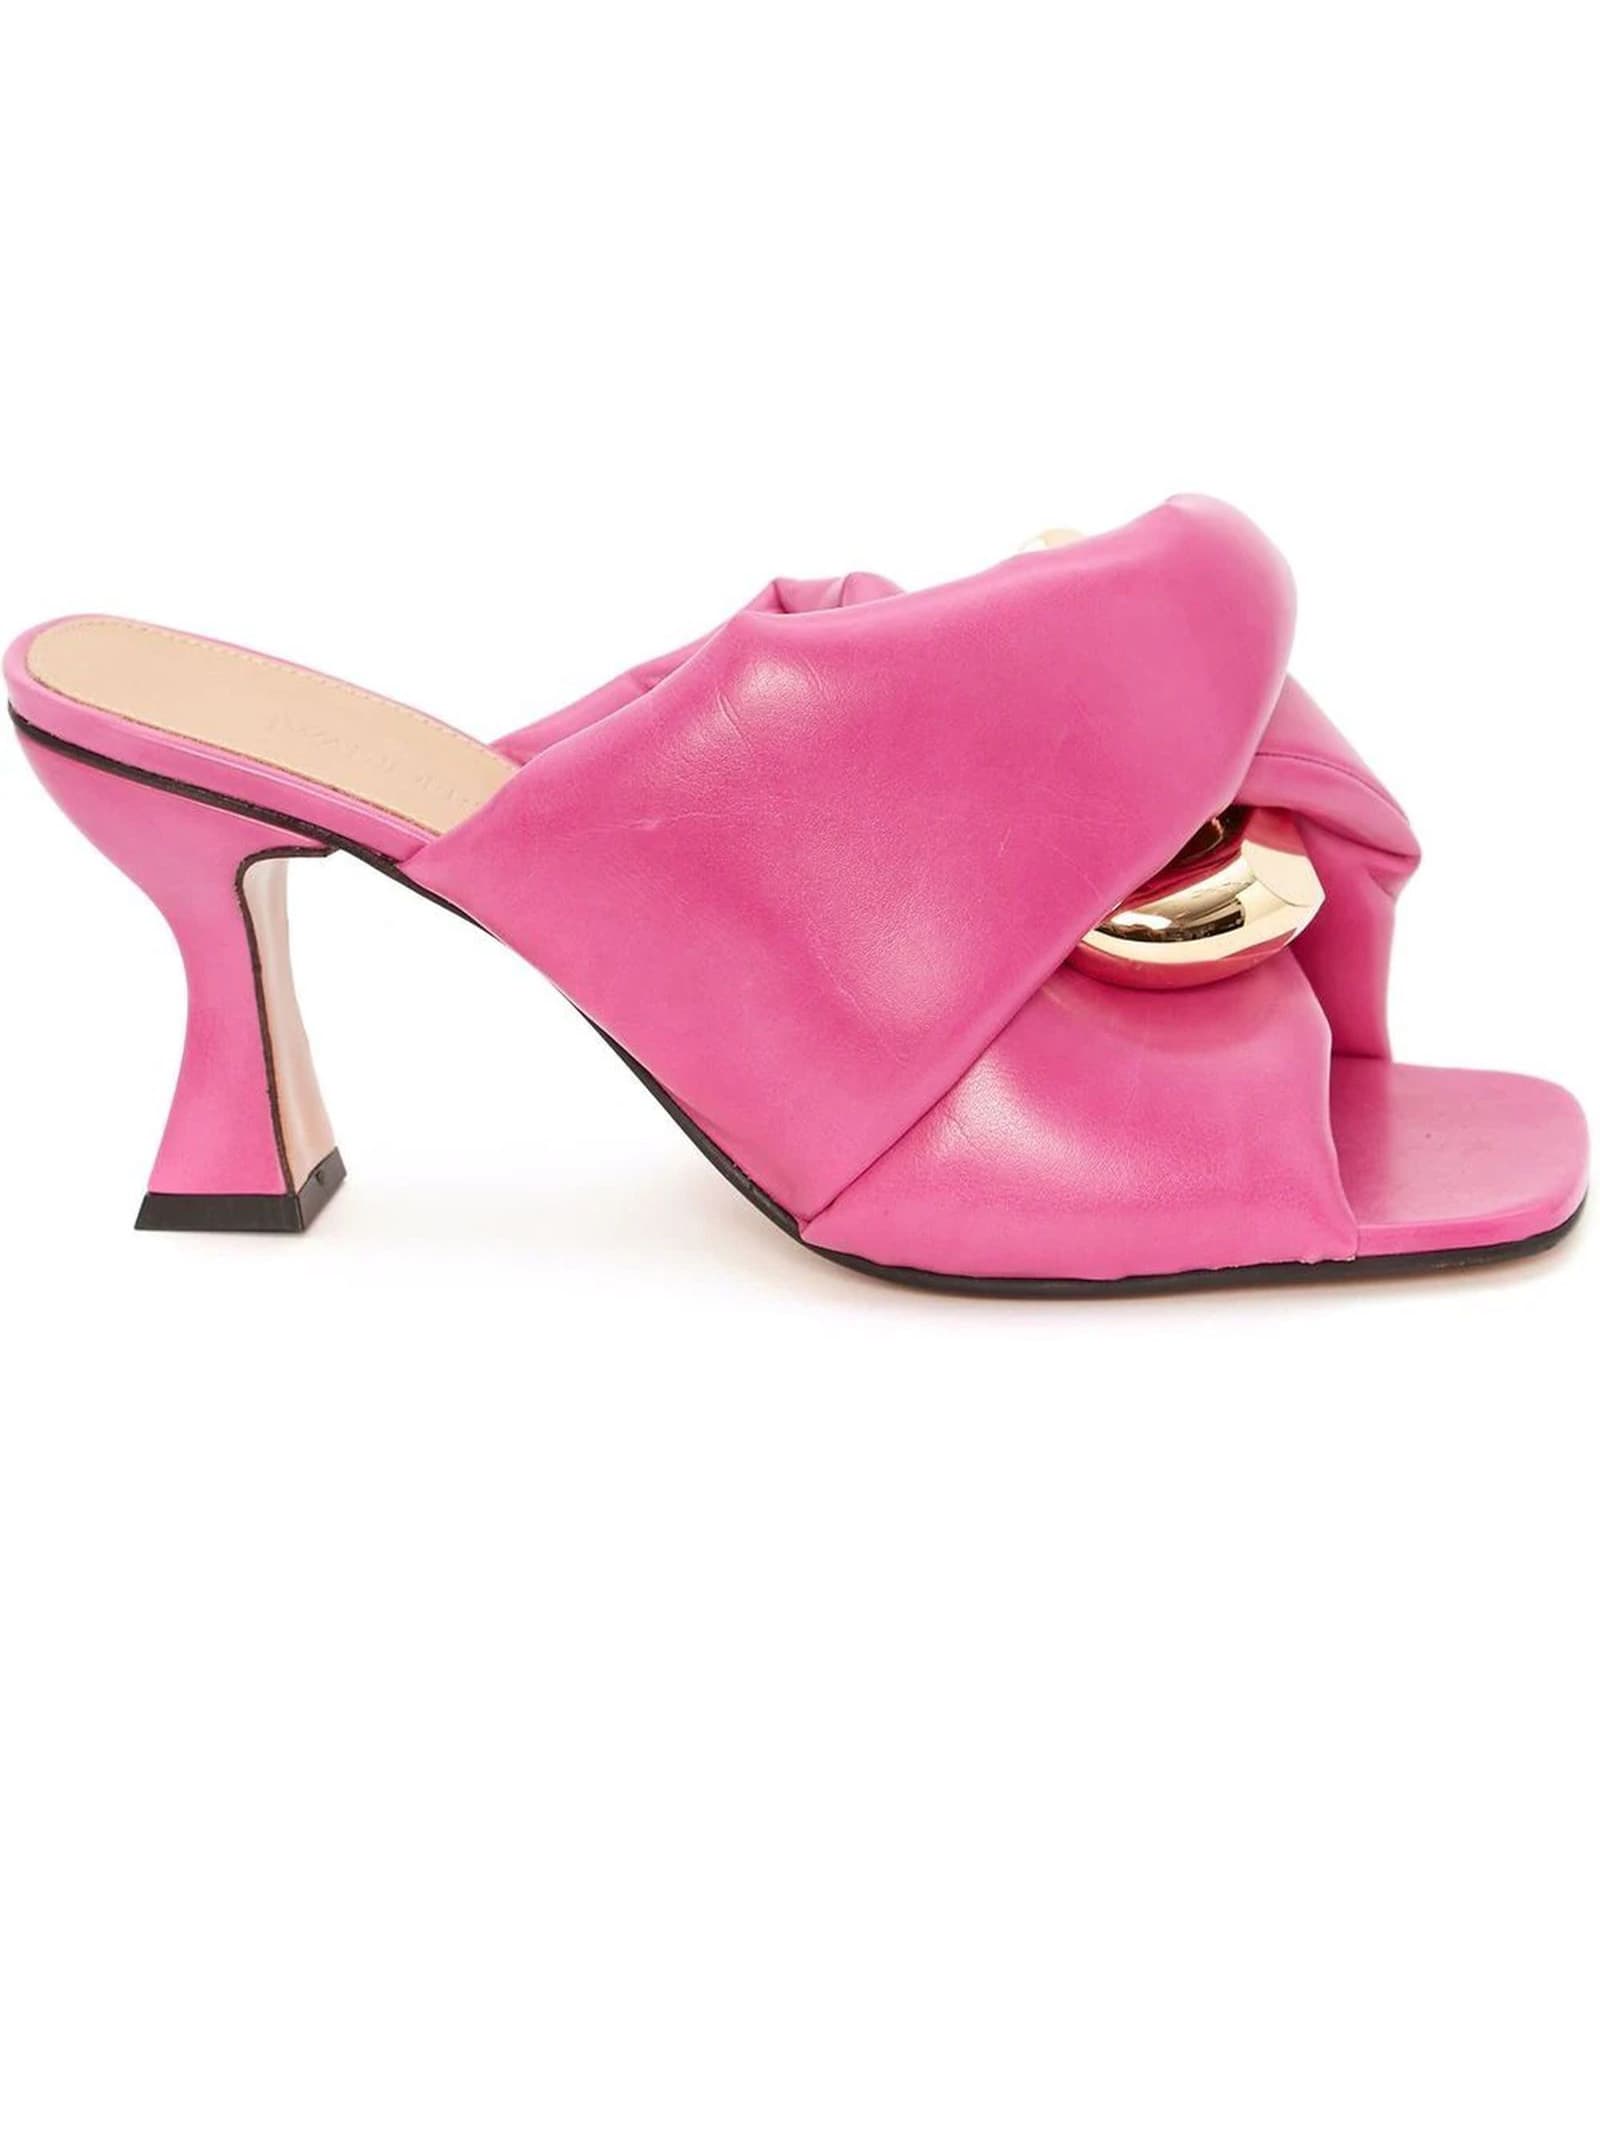 J.W. Anderson Pink Sandals